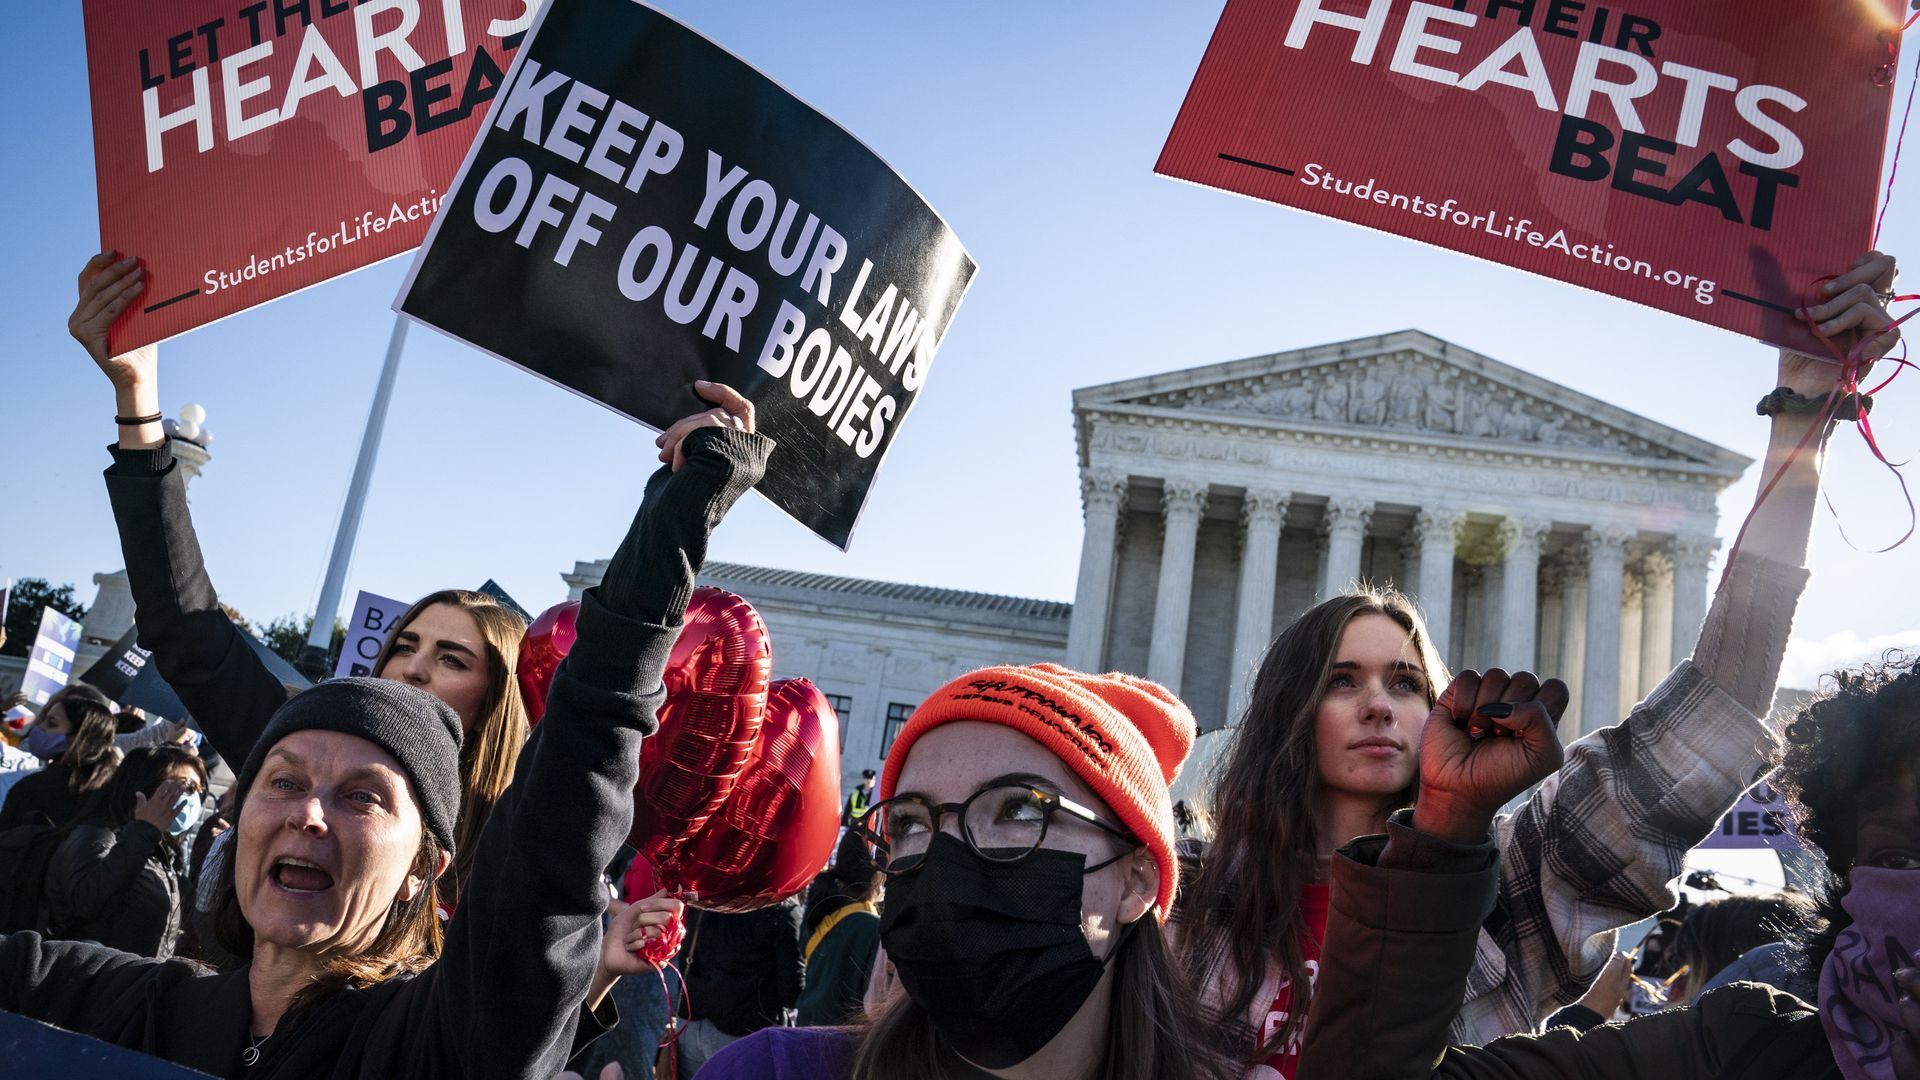 Protesters in front of the Supreme Court waving signs that say "Keep your laws off our bodies" and "Let hearts beat"